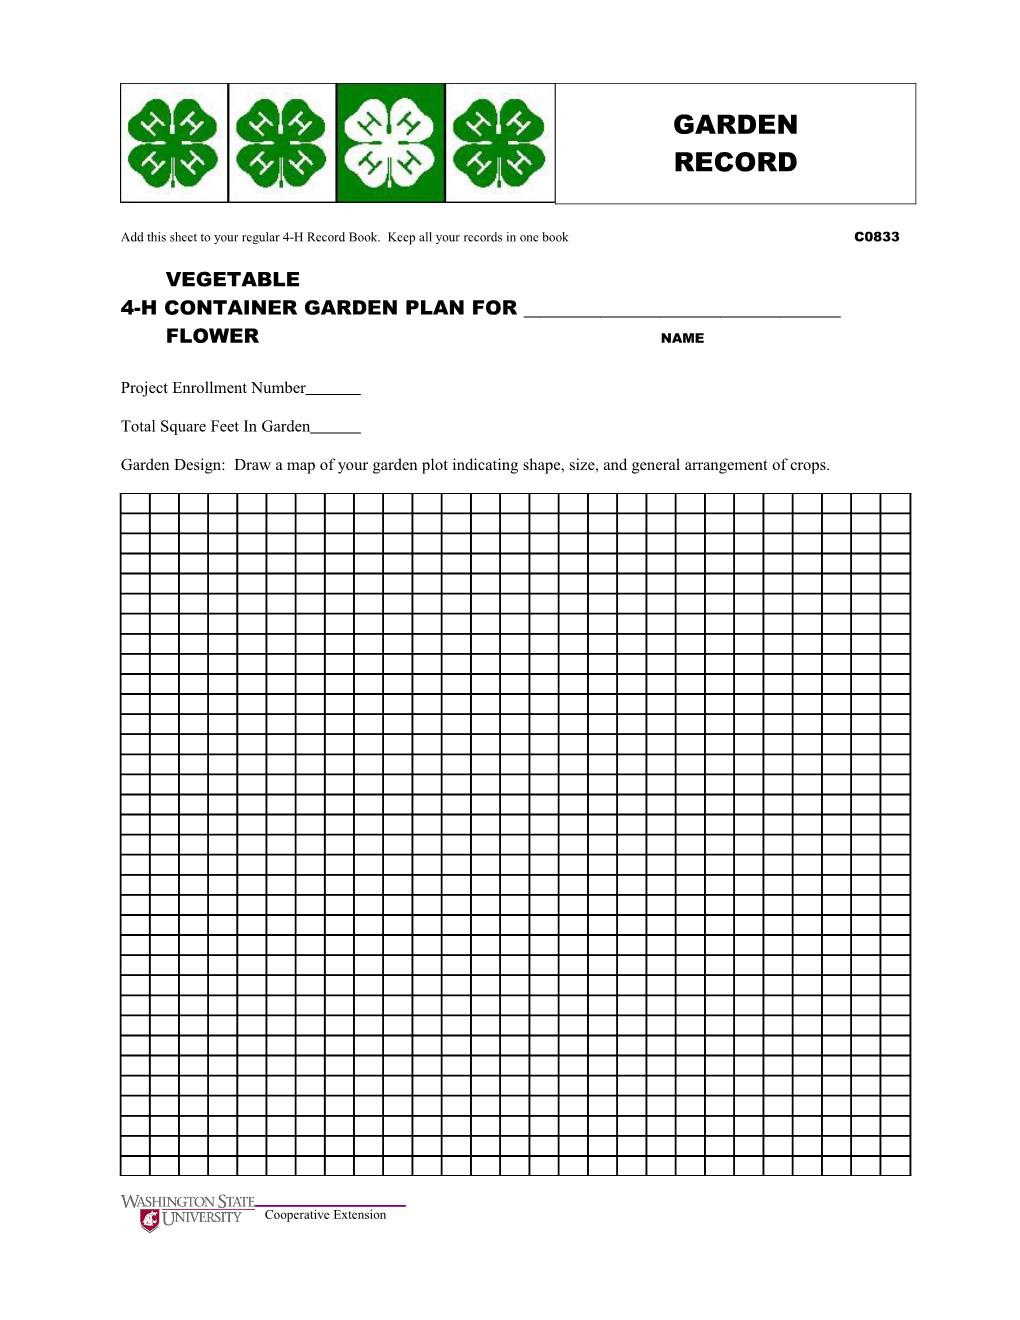 Add This Sheet to Your Regular 4-H Record Book. Keep All Your Records in One Book C0833